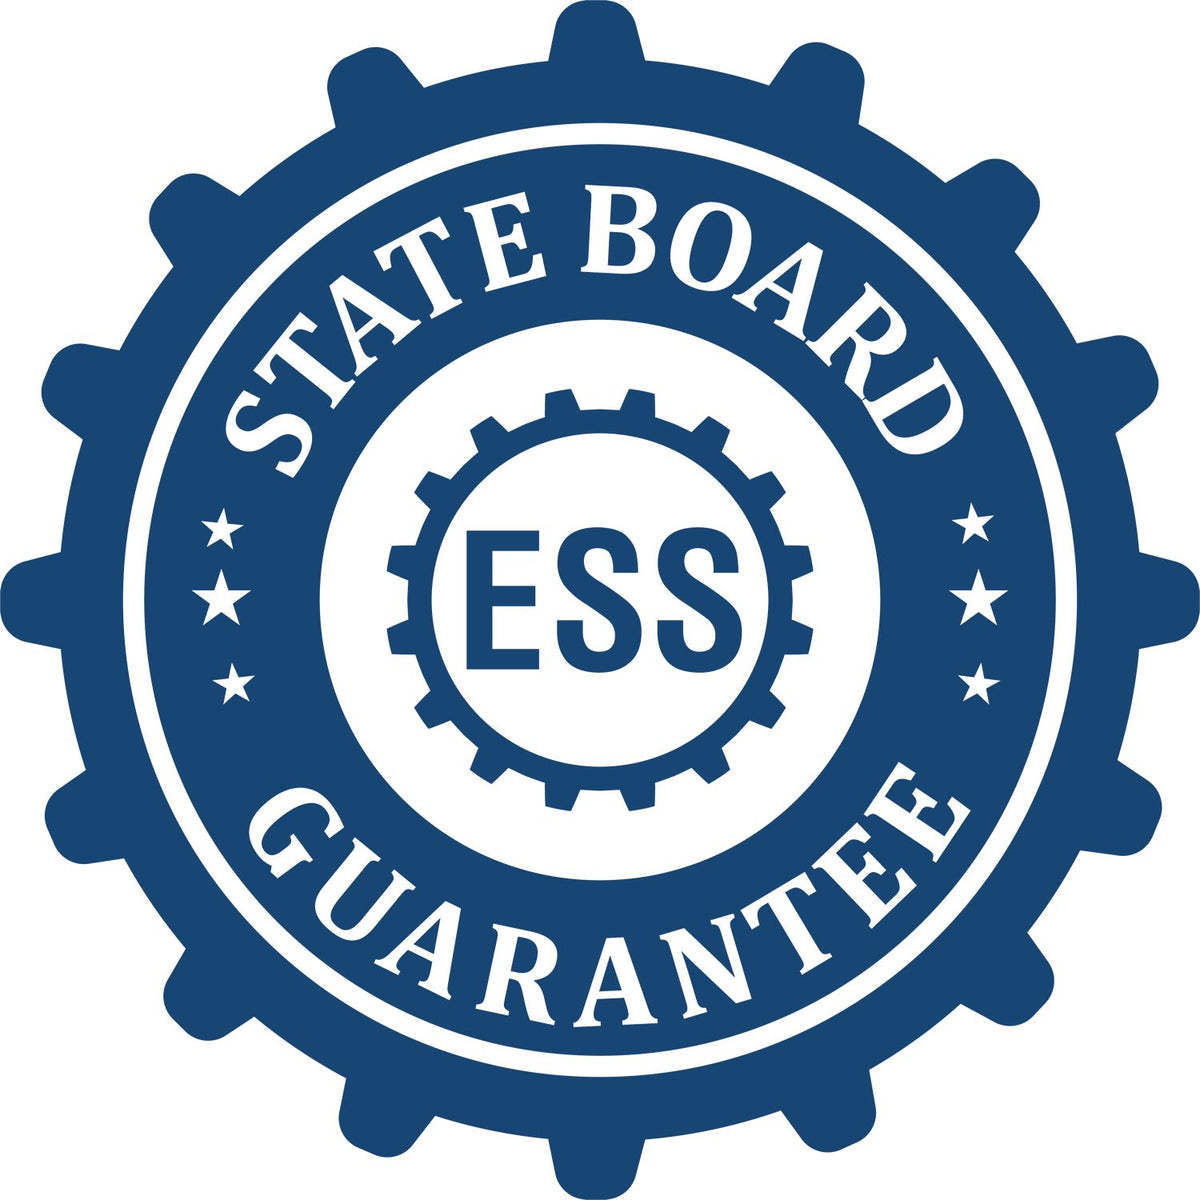 An emblem in a gear shape illustrating a state board guarantee for the State of Tennessee Extended Long Reach Engineer Seal product.